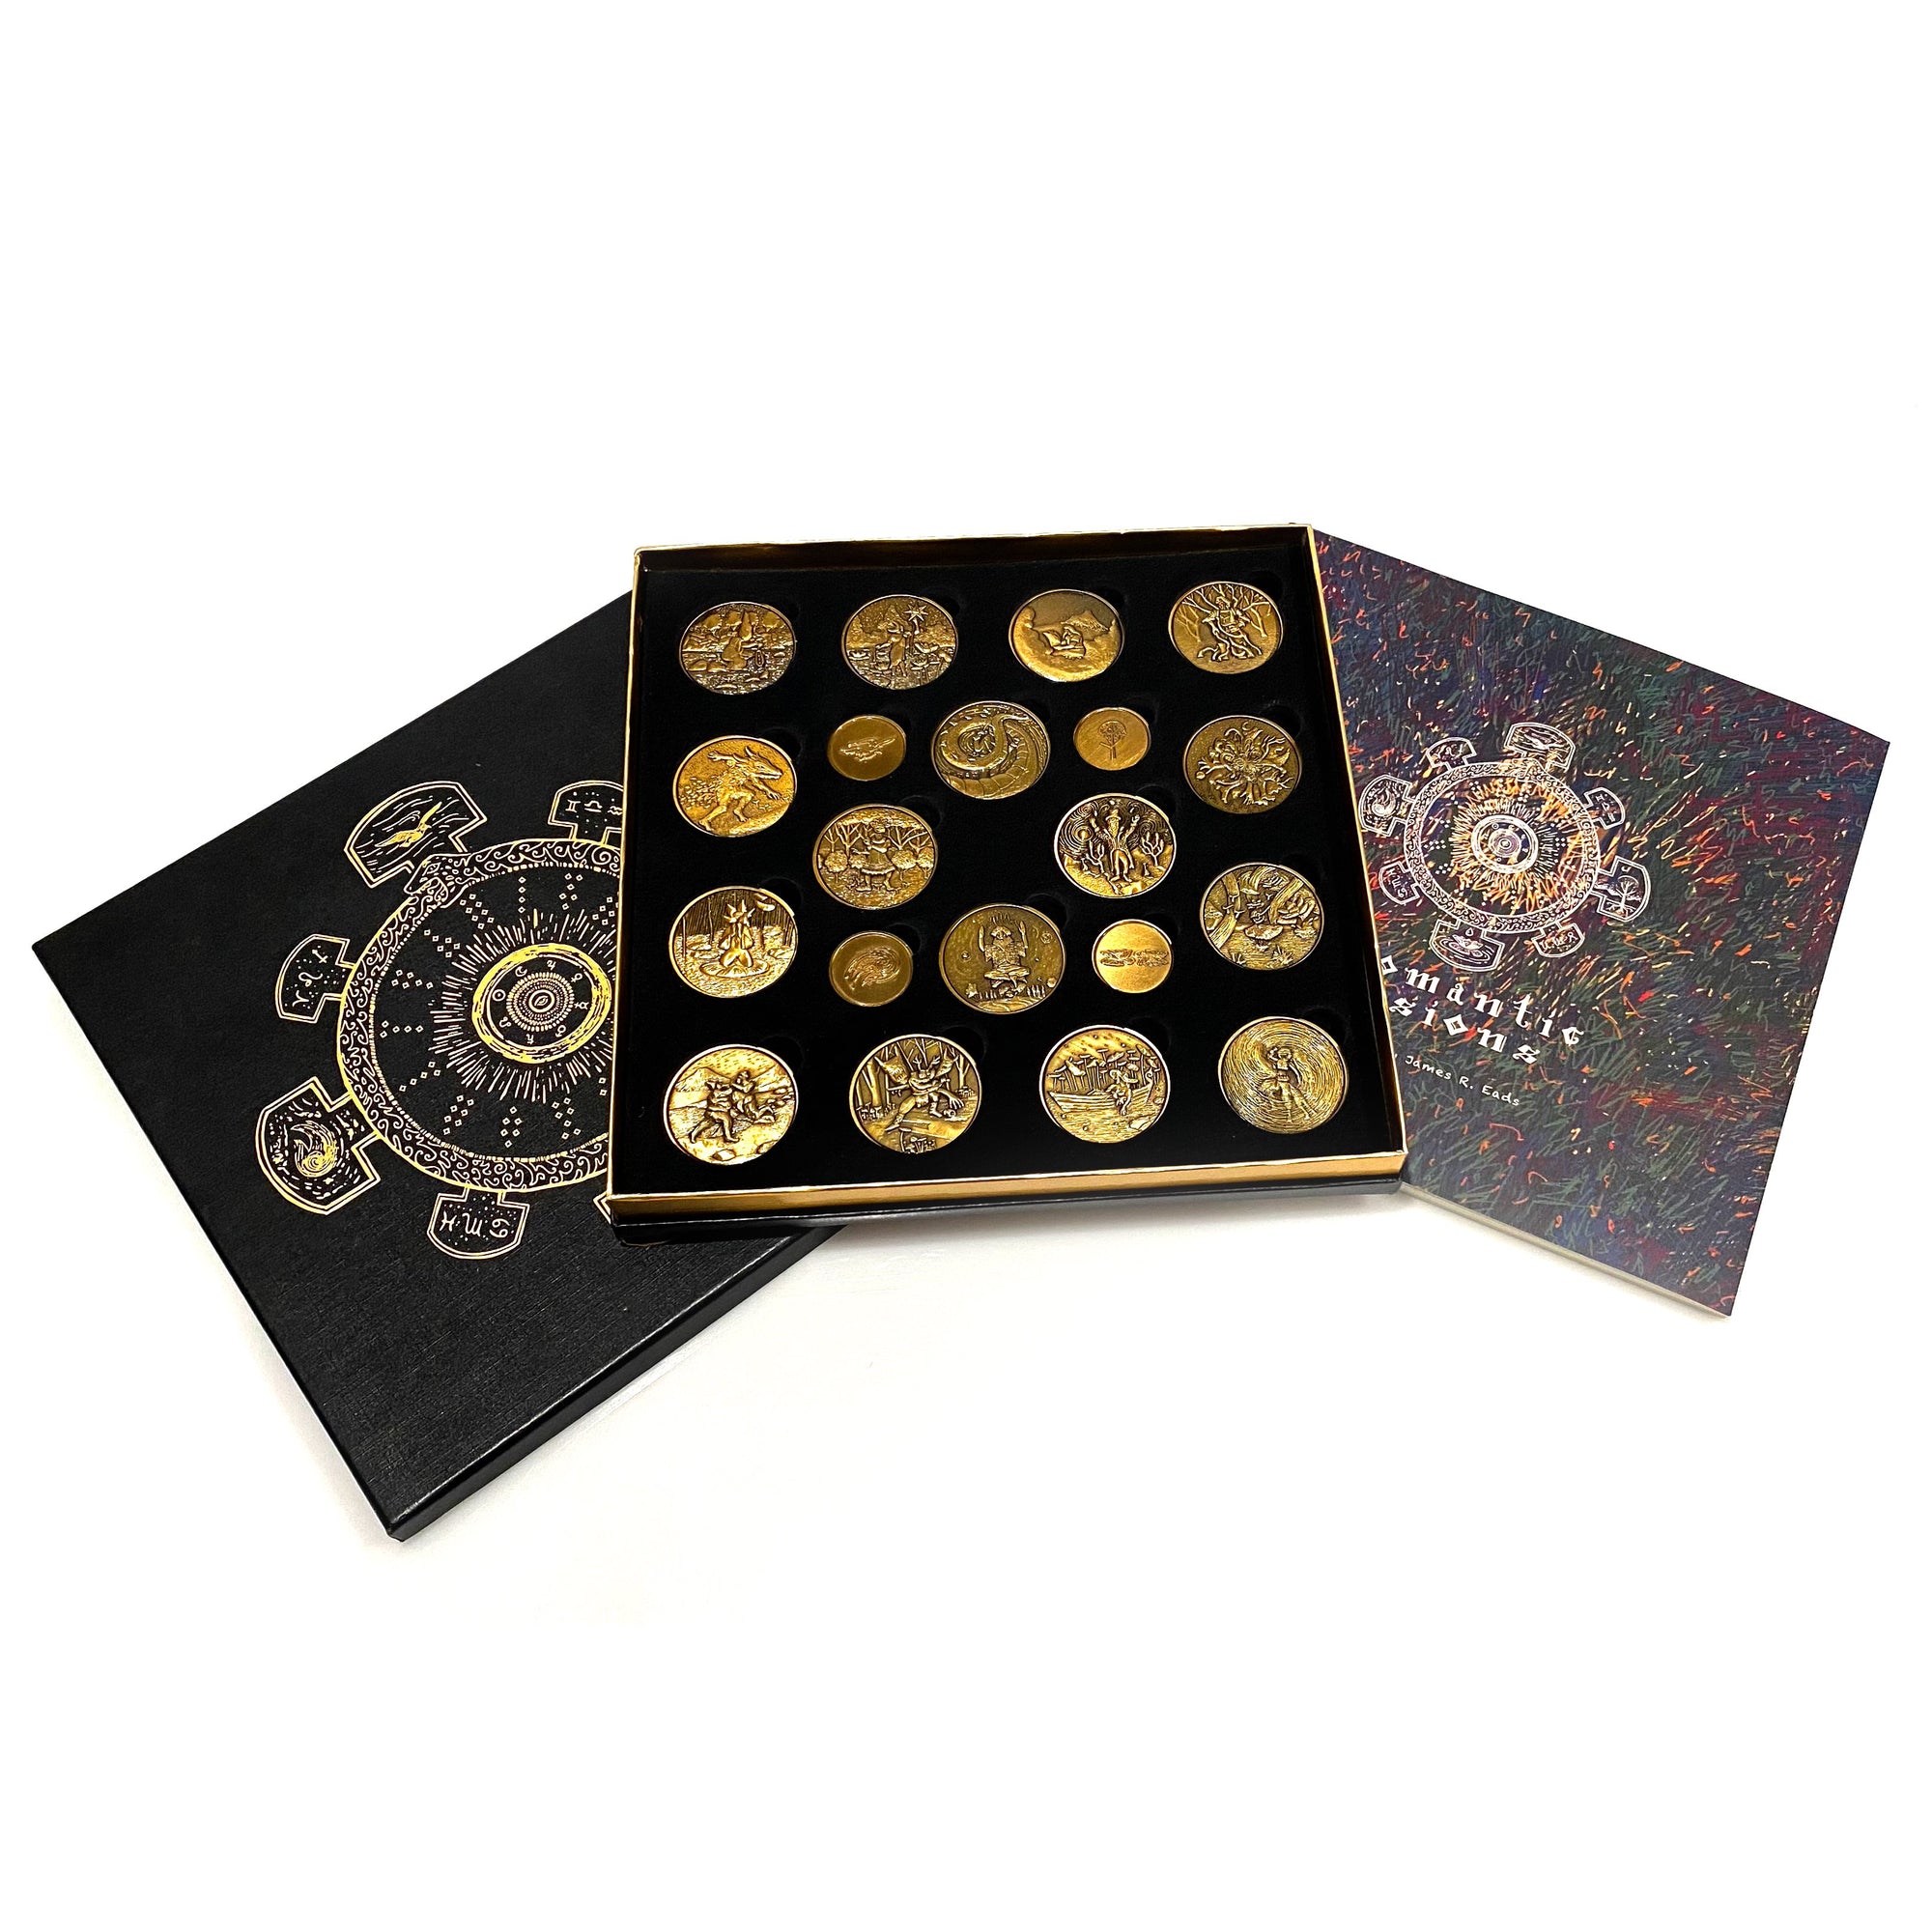 Geomantic Visions (Set of 20 Coins)